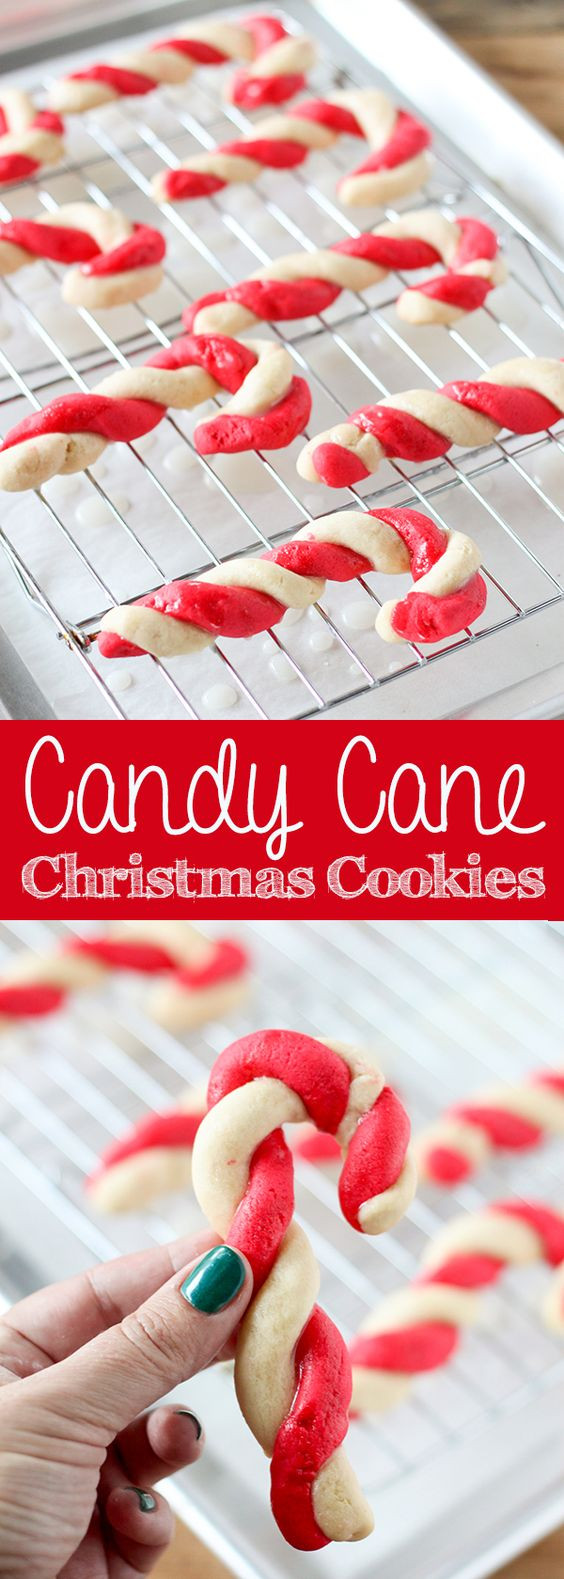 Candy Cane Christmas Cookies
 Pinterest • The world’s catalog of ideas